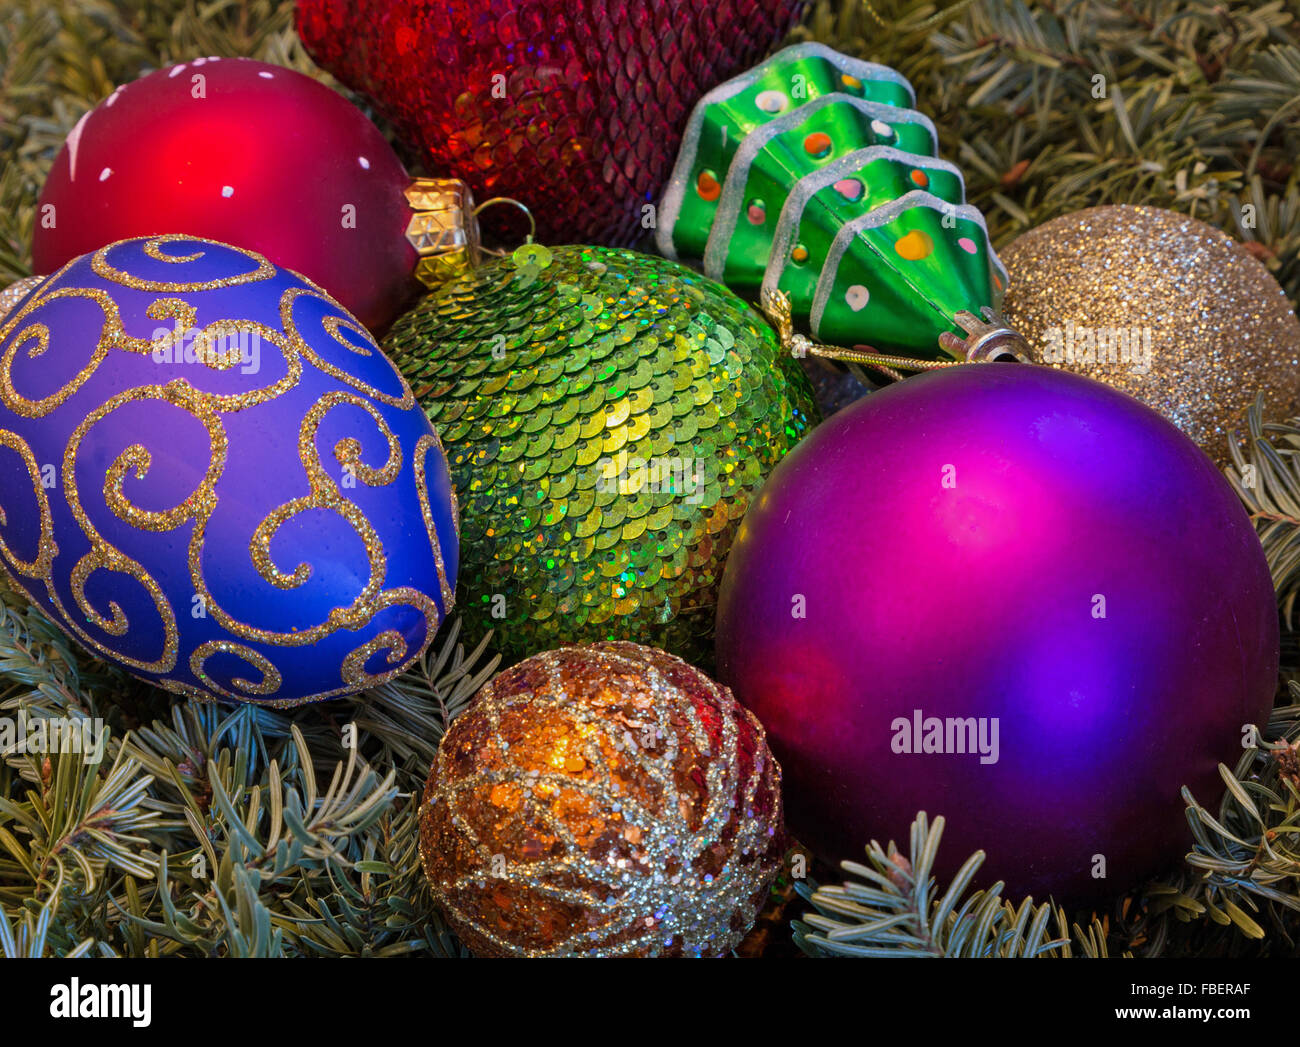 close up of Christmas tree ornaments Stock Photo